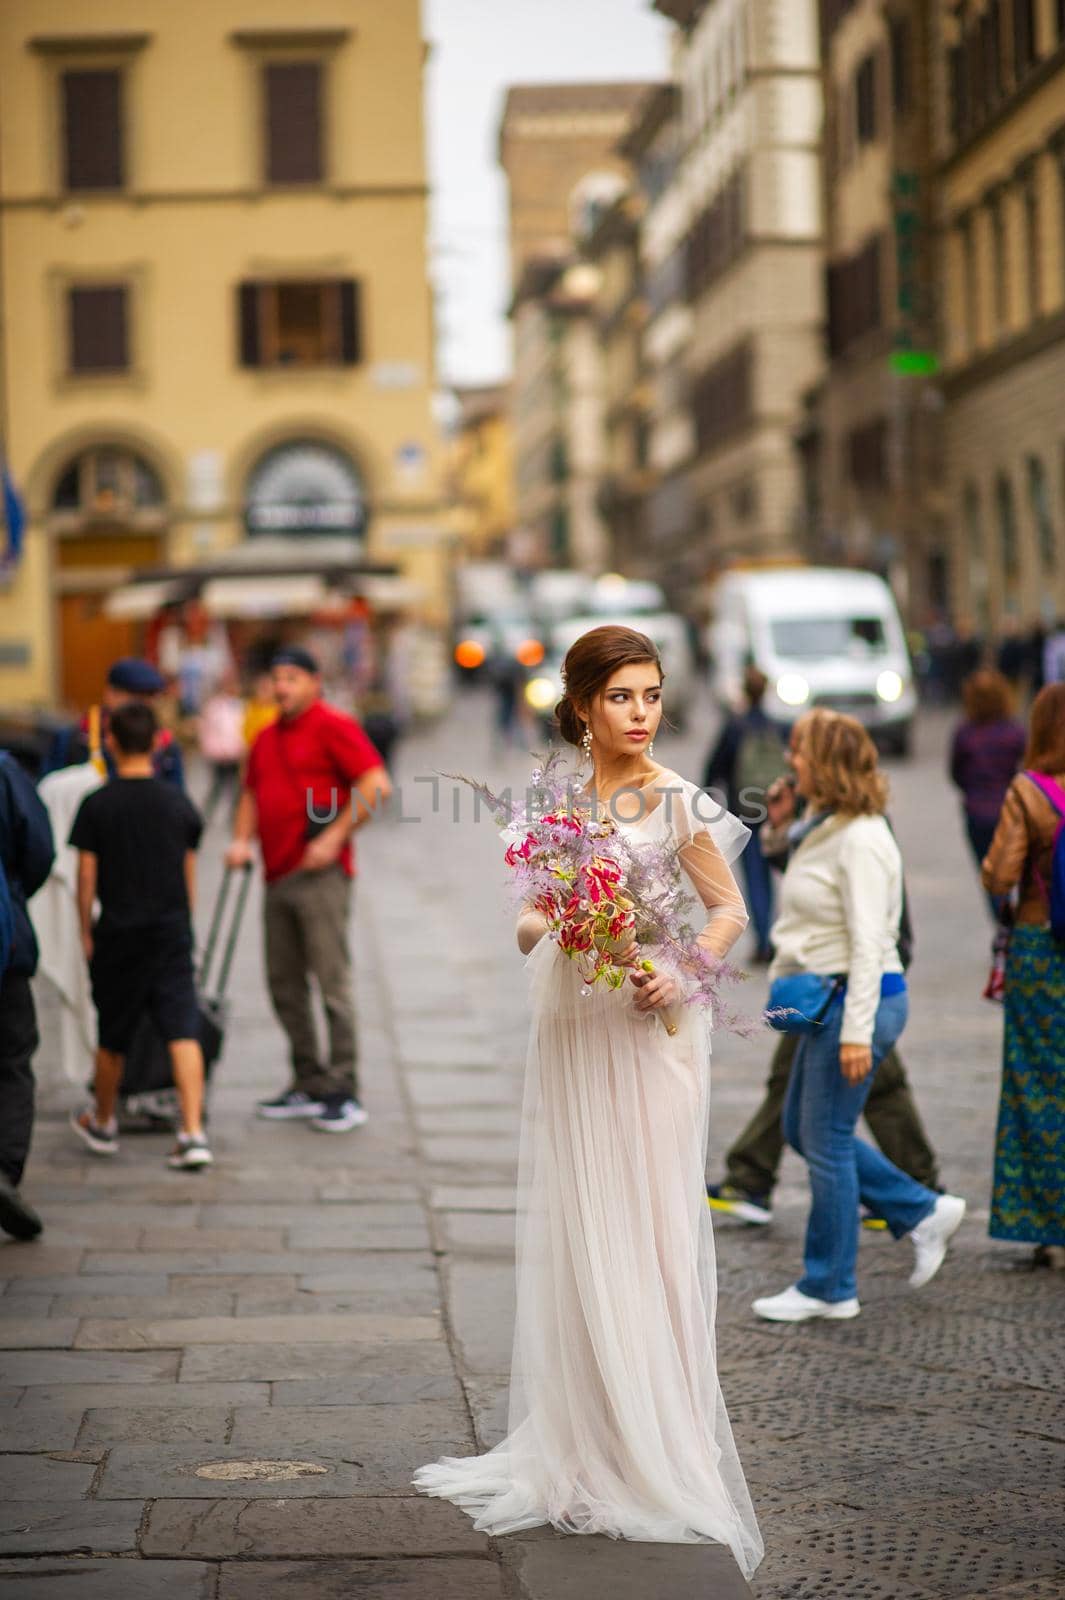 a bride in a wedding dress with a Venetian mask in her hands in Florence.Italy by Lobachad